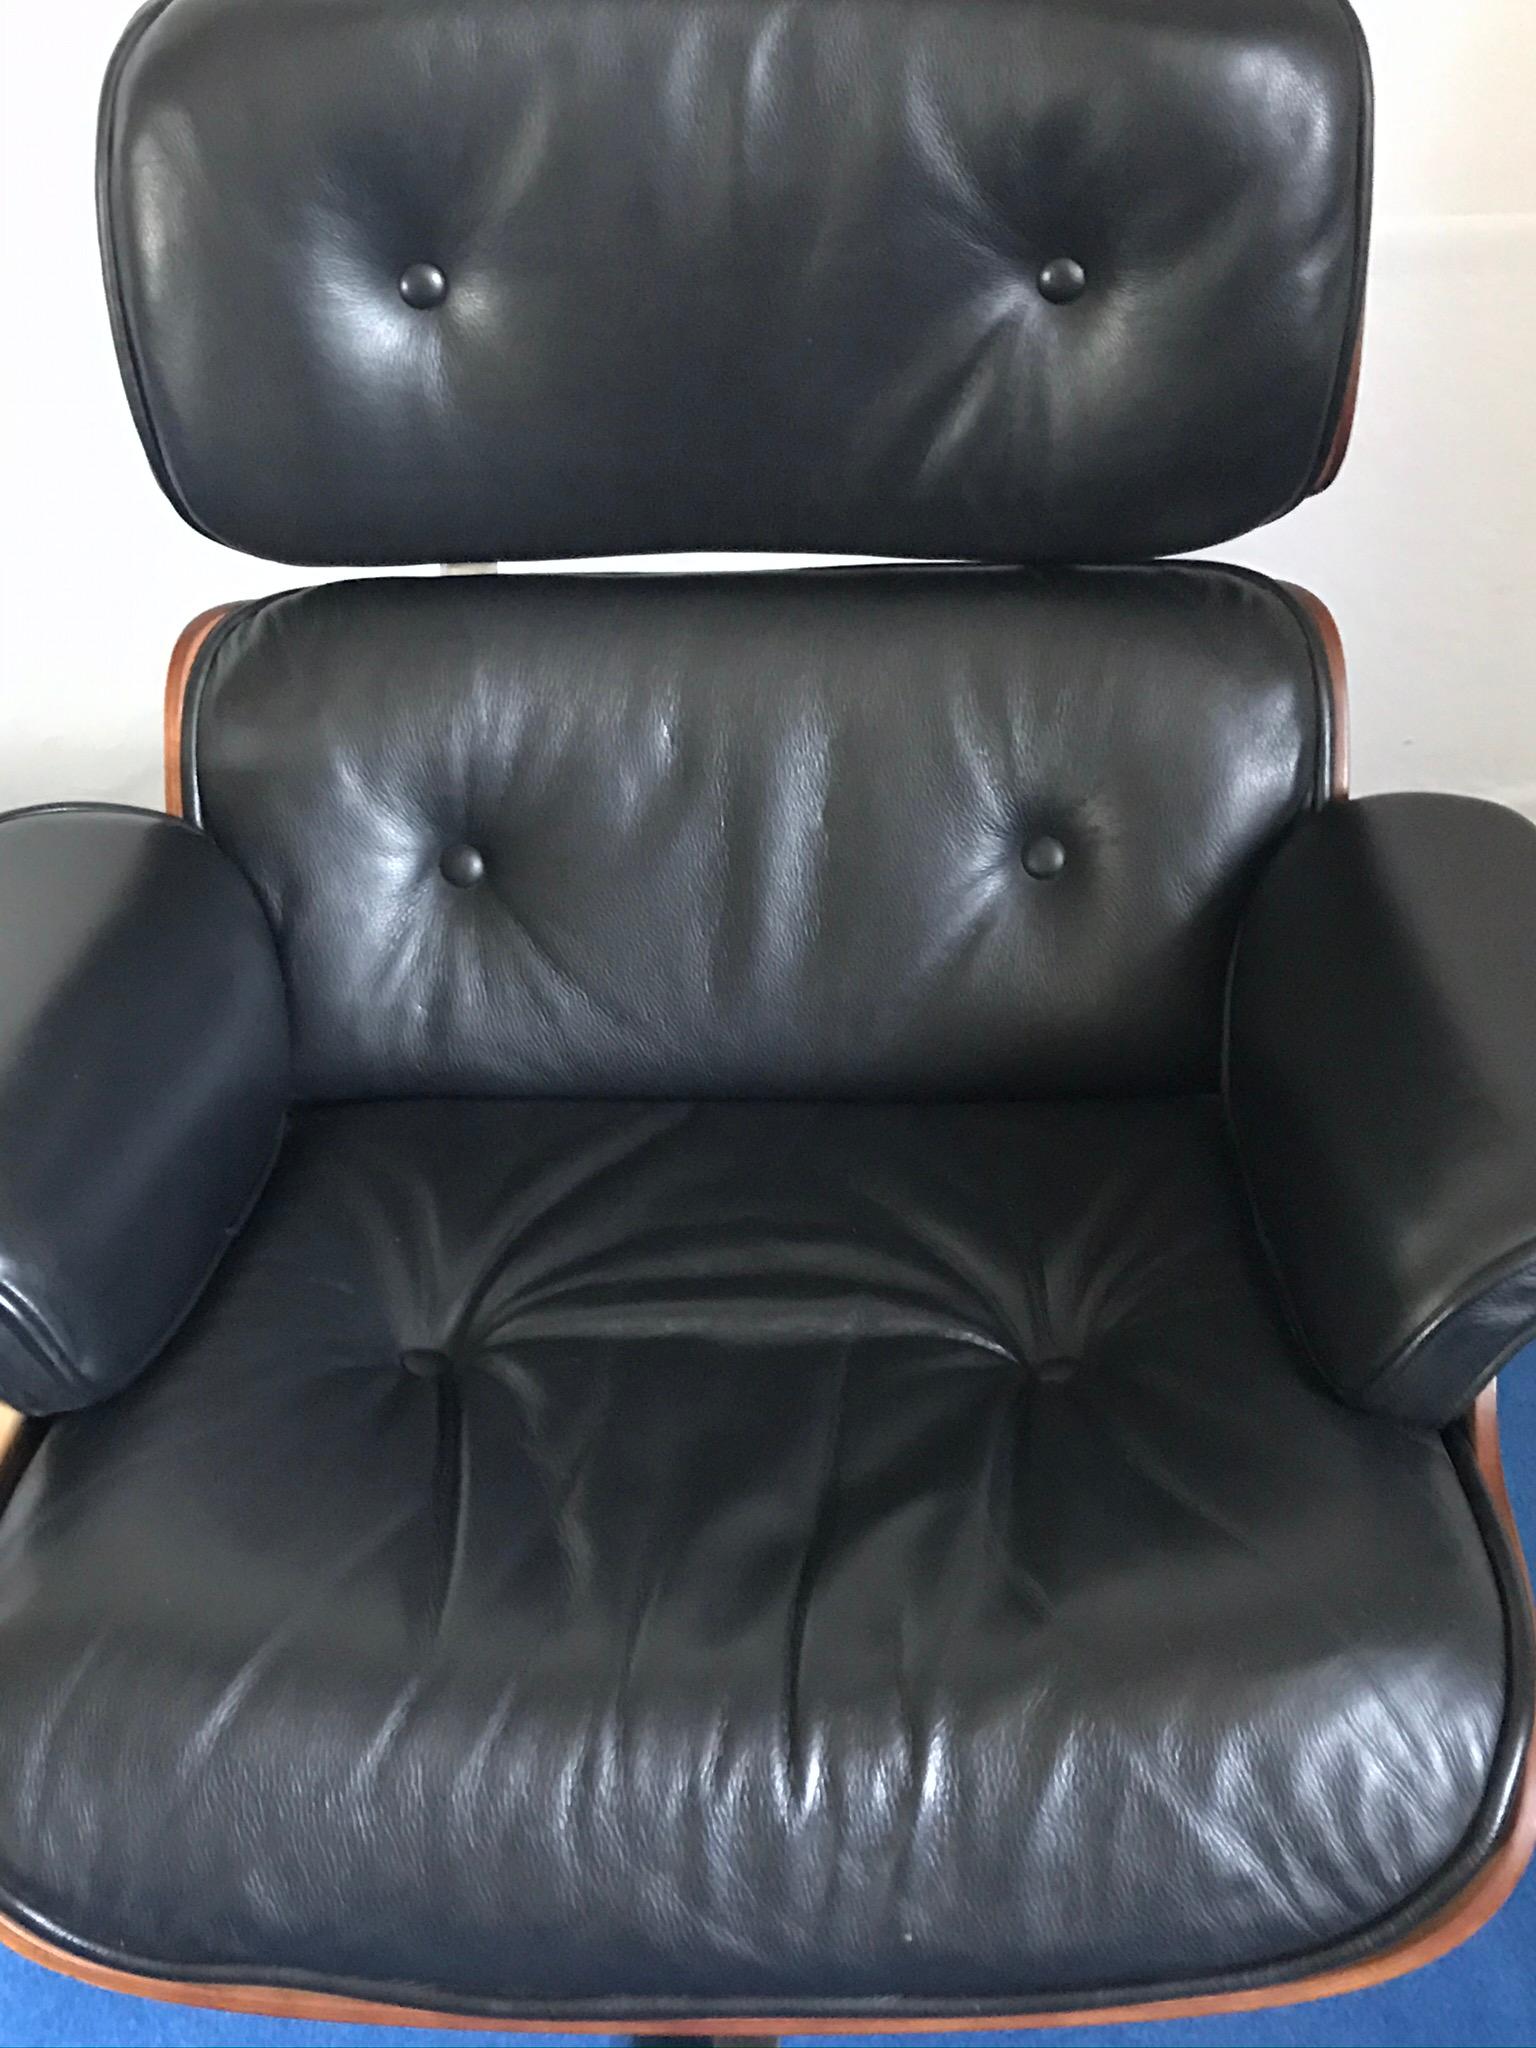 Late 20th Century Charles Ray Eames Lounge Chair 670, Black Leather